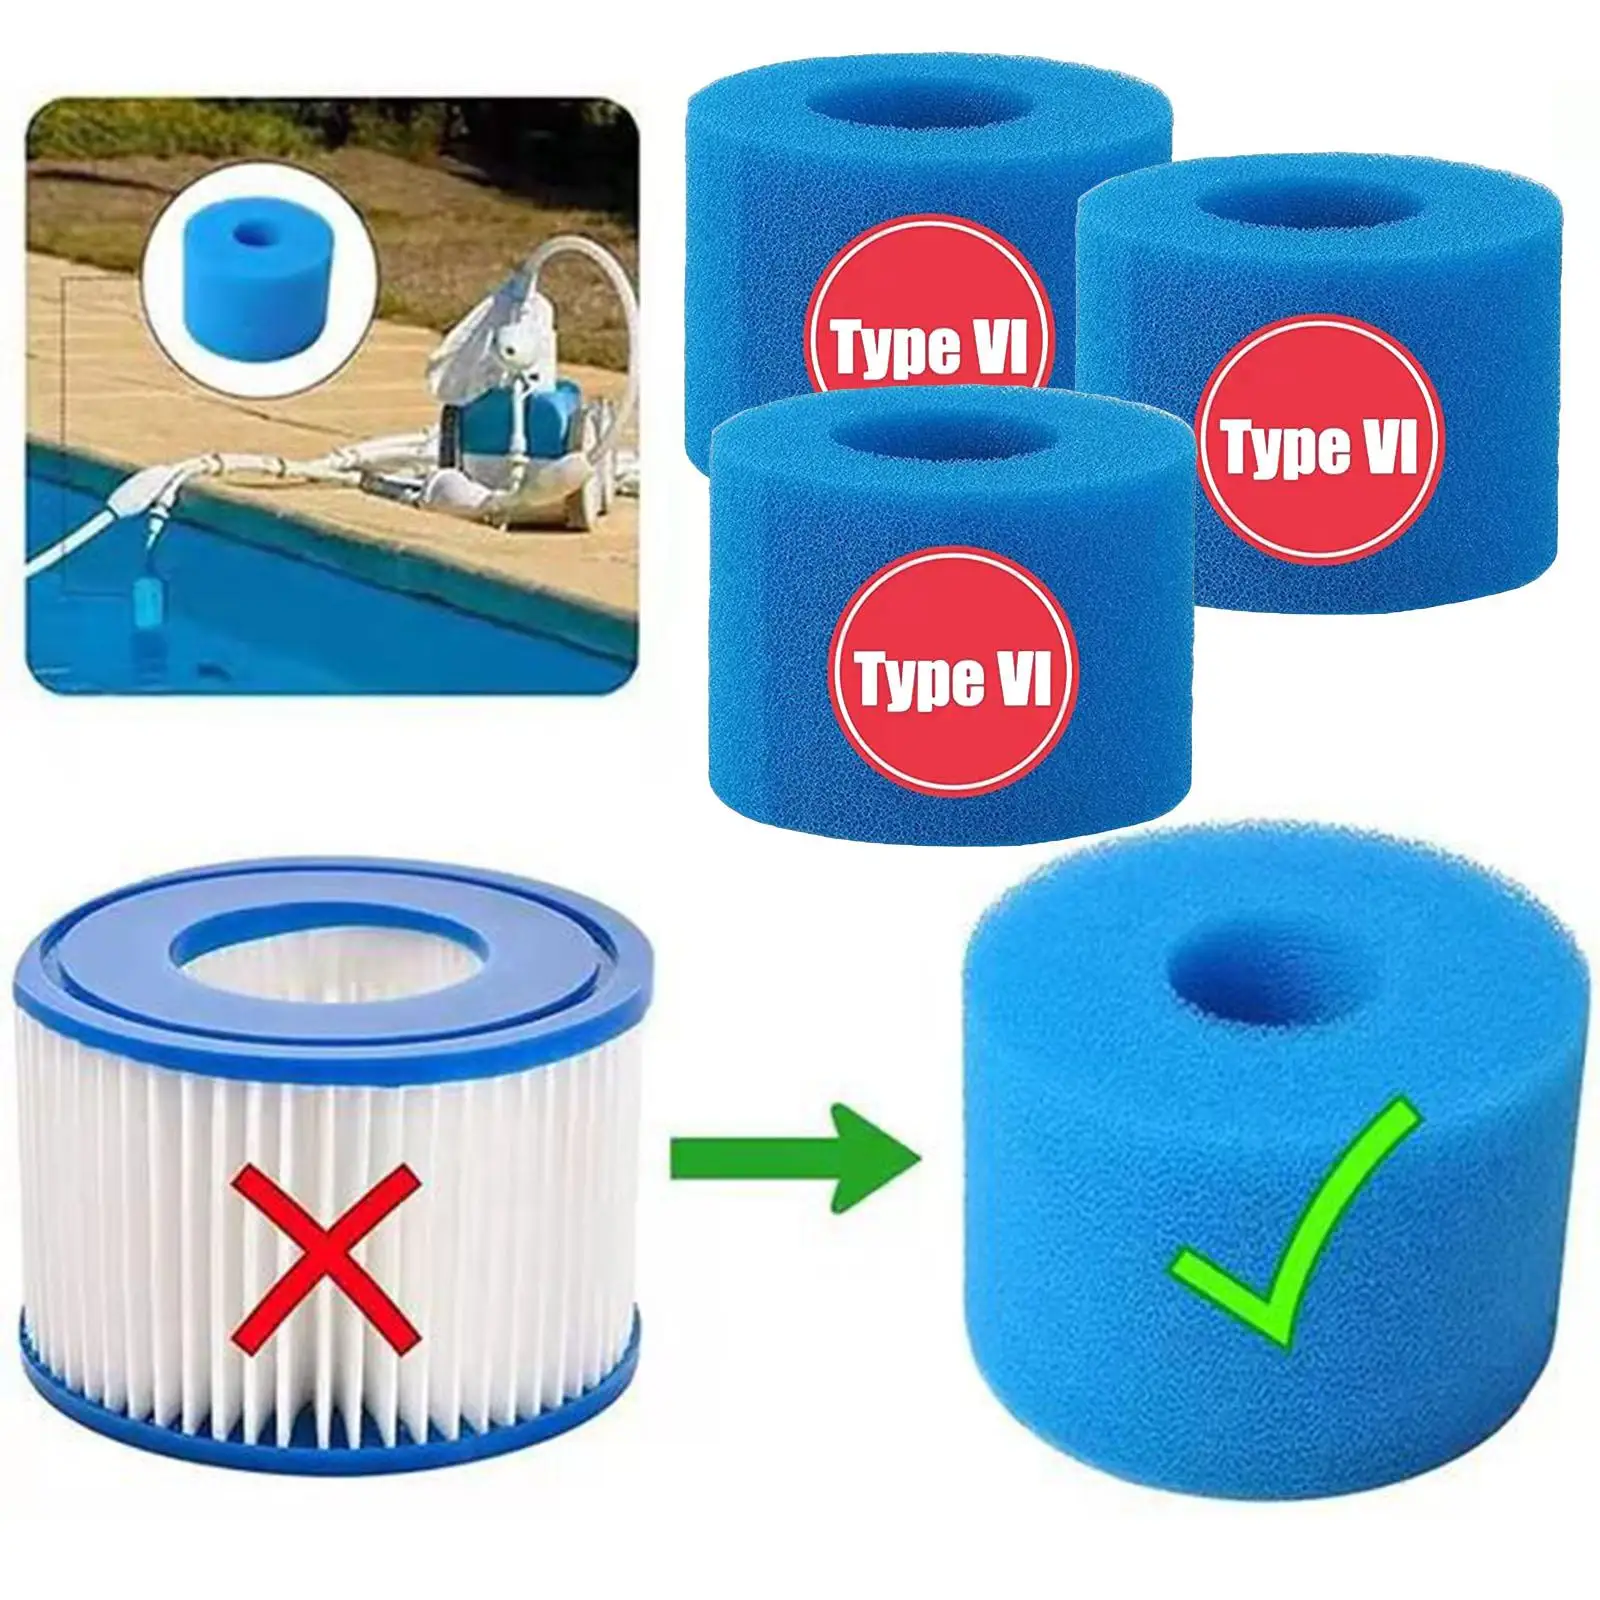 3x Filter Sponge Replacement Washable  for Type V1 Accessories